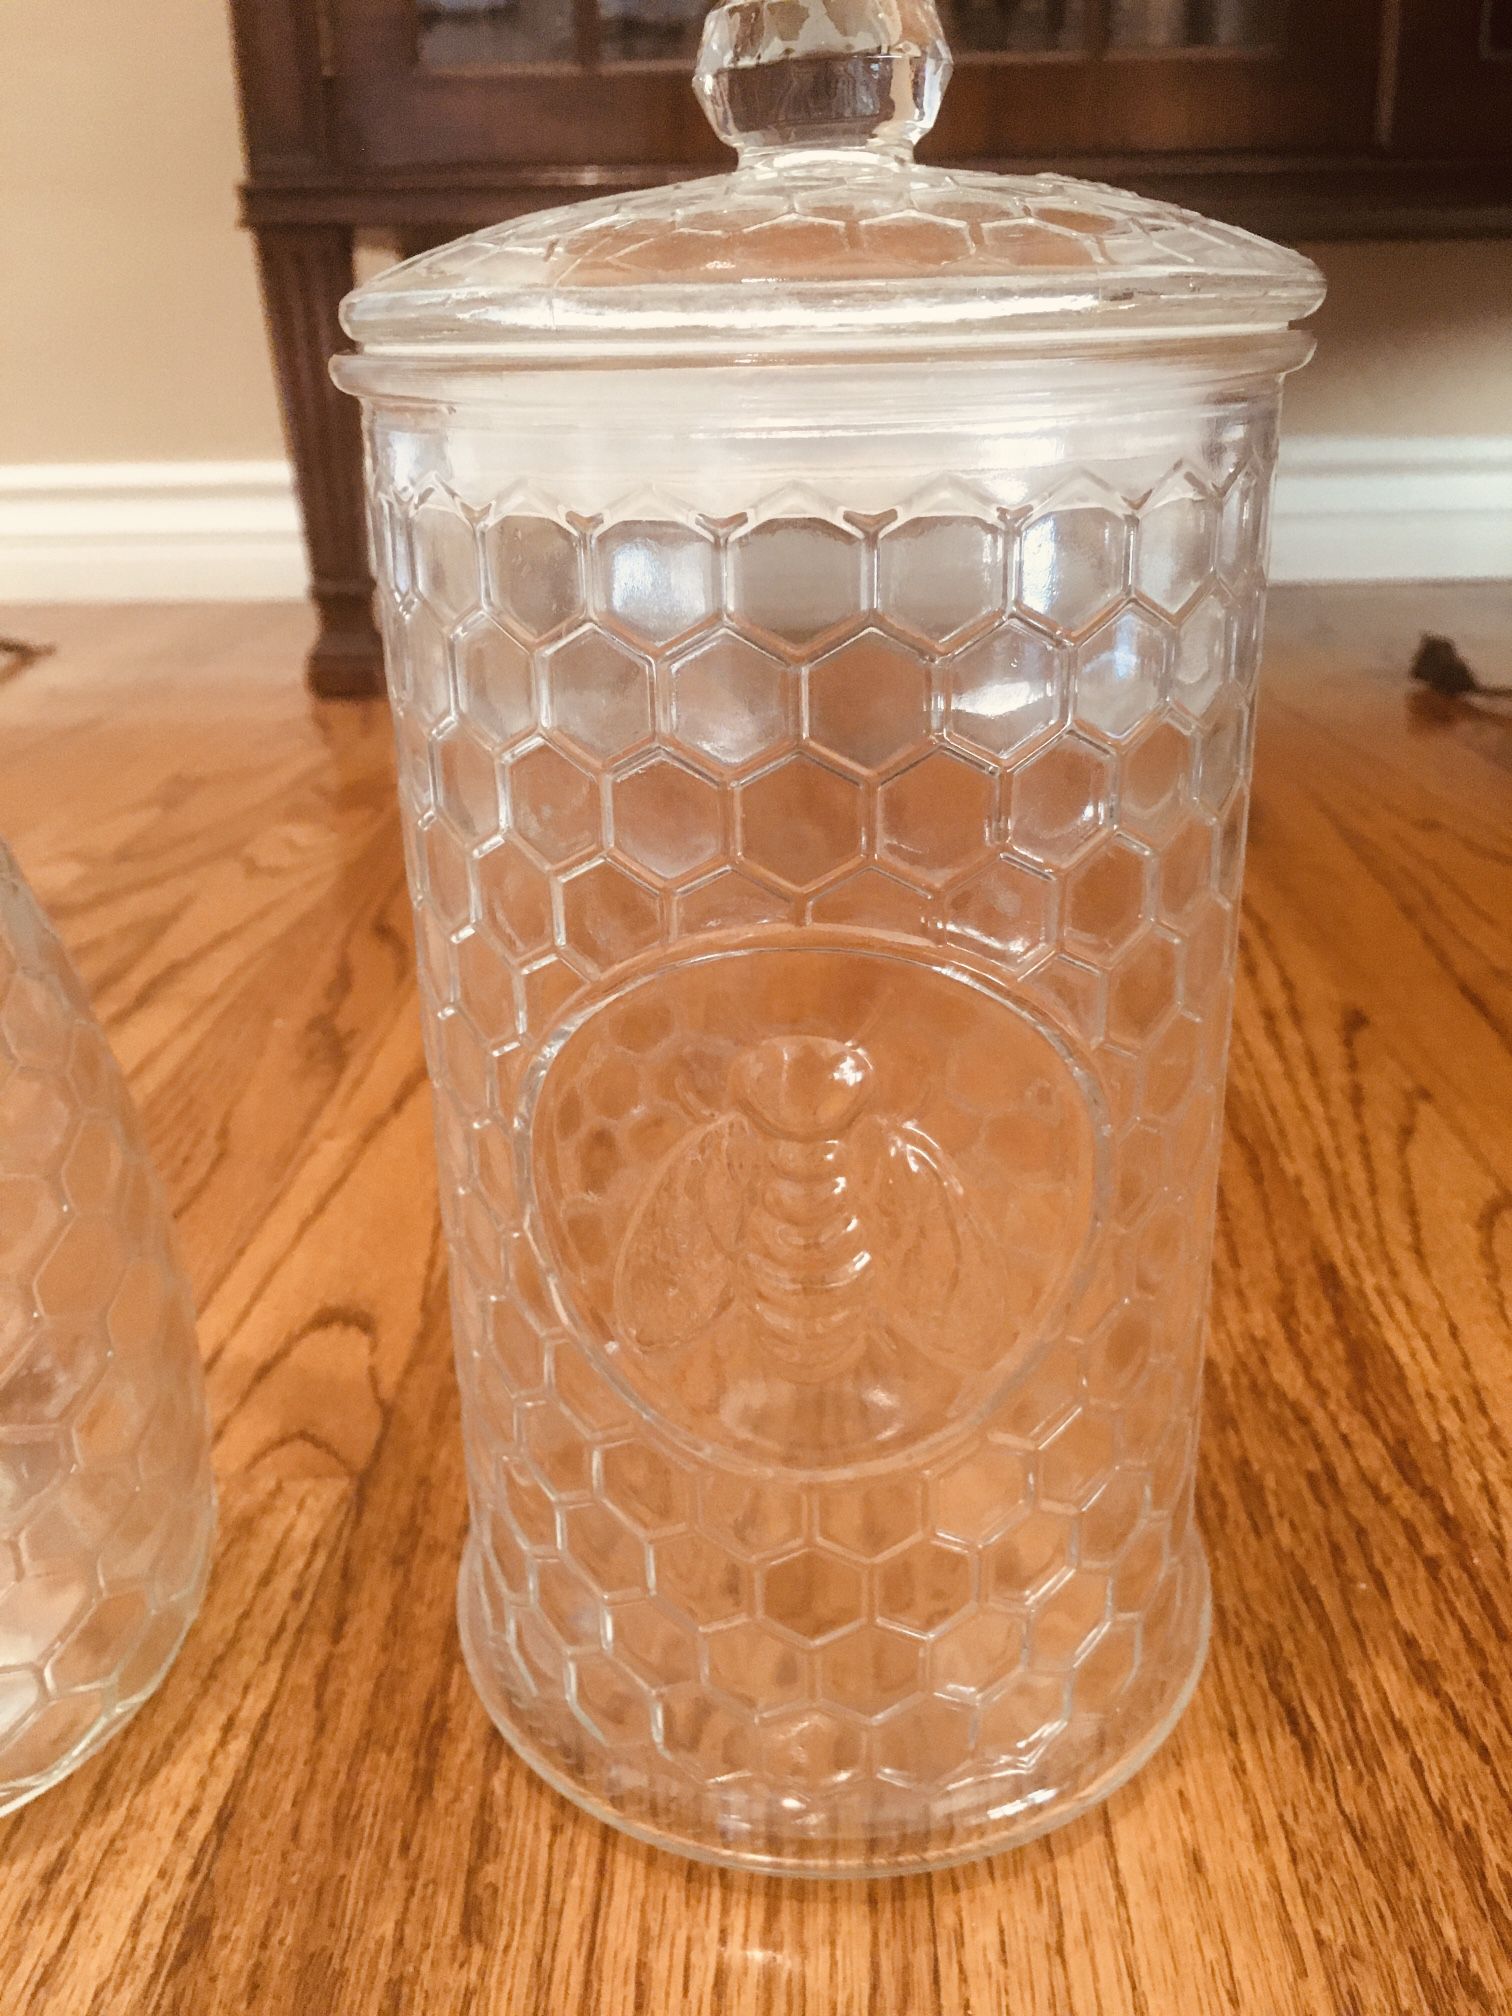 Circlewear Garden Gate Honey Bee Drink Glass Pitcher Carafe And Storage Container 